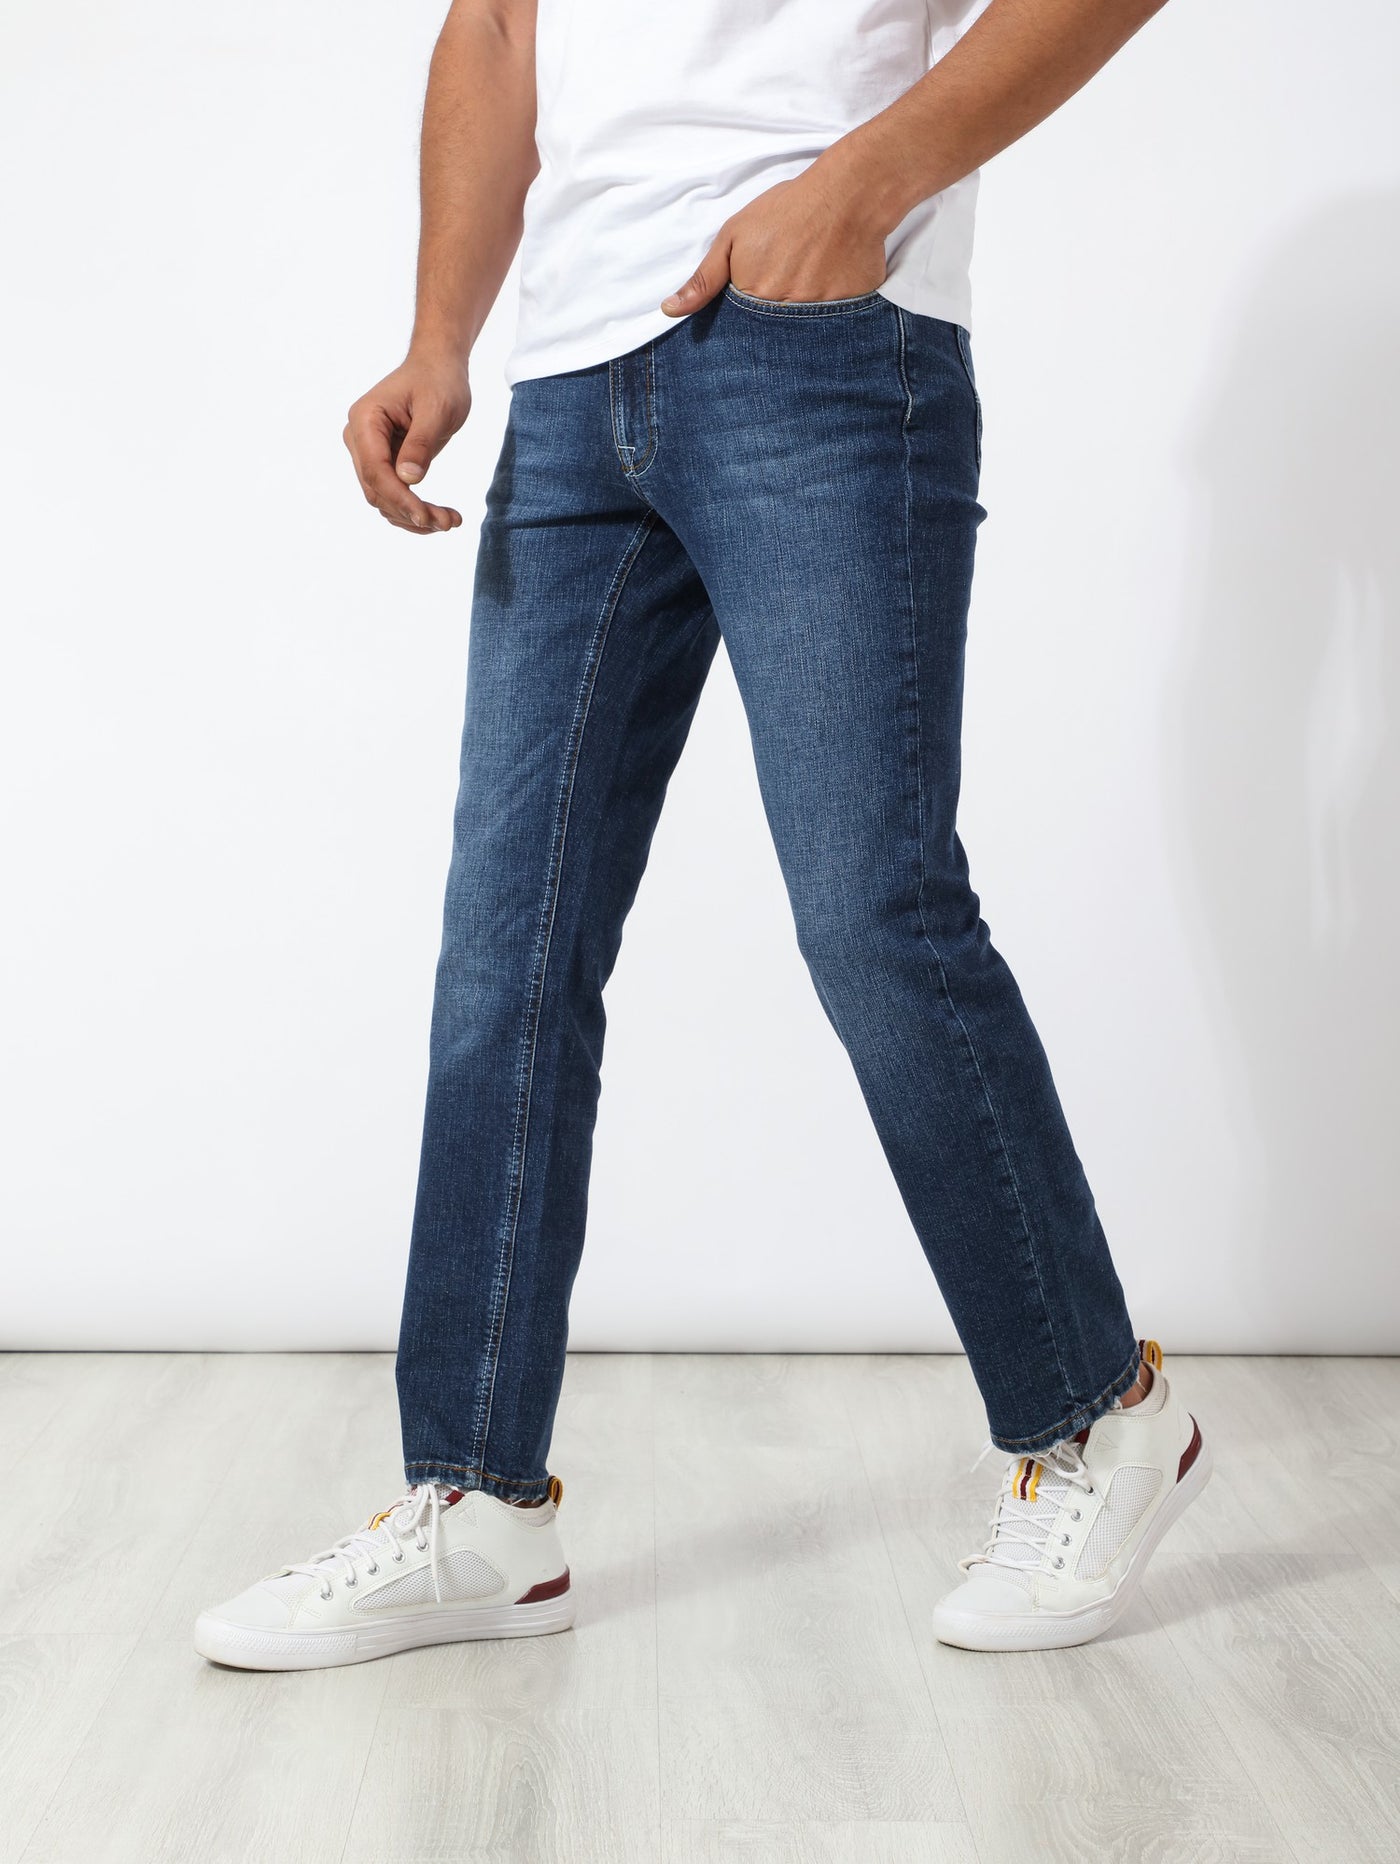 Denim Pants - Straight Fit - Washed Effect